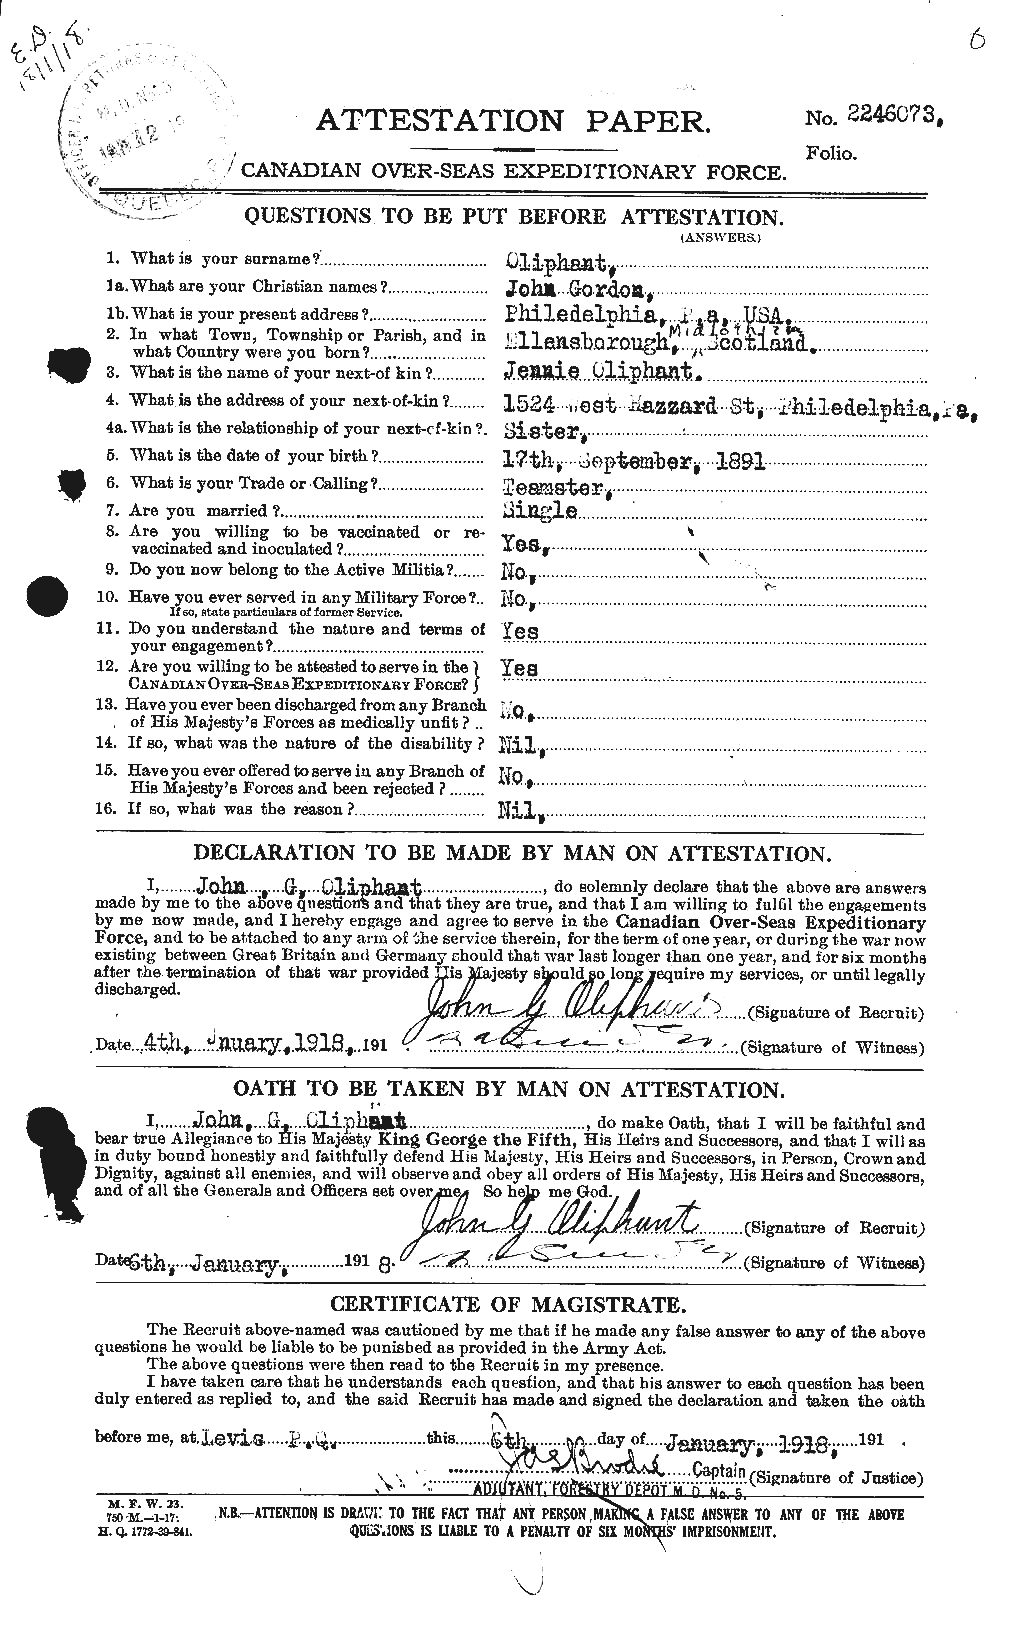 Personnel Records of the First World War - CEF 557065a